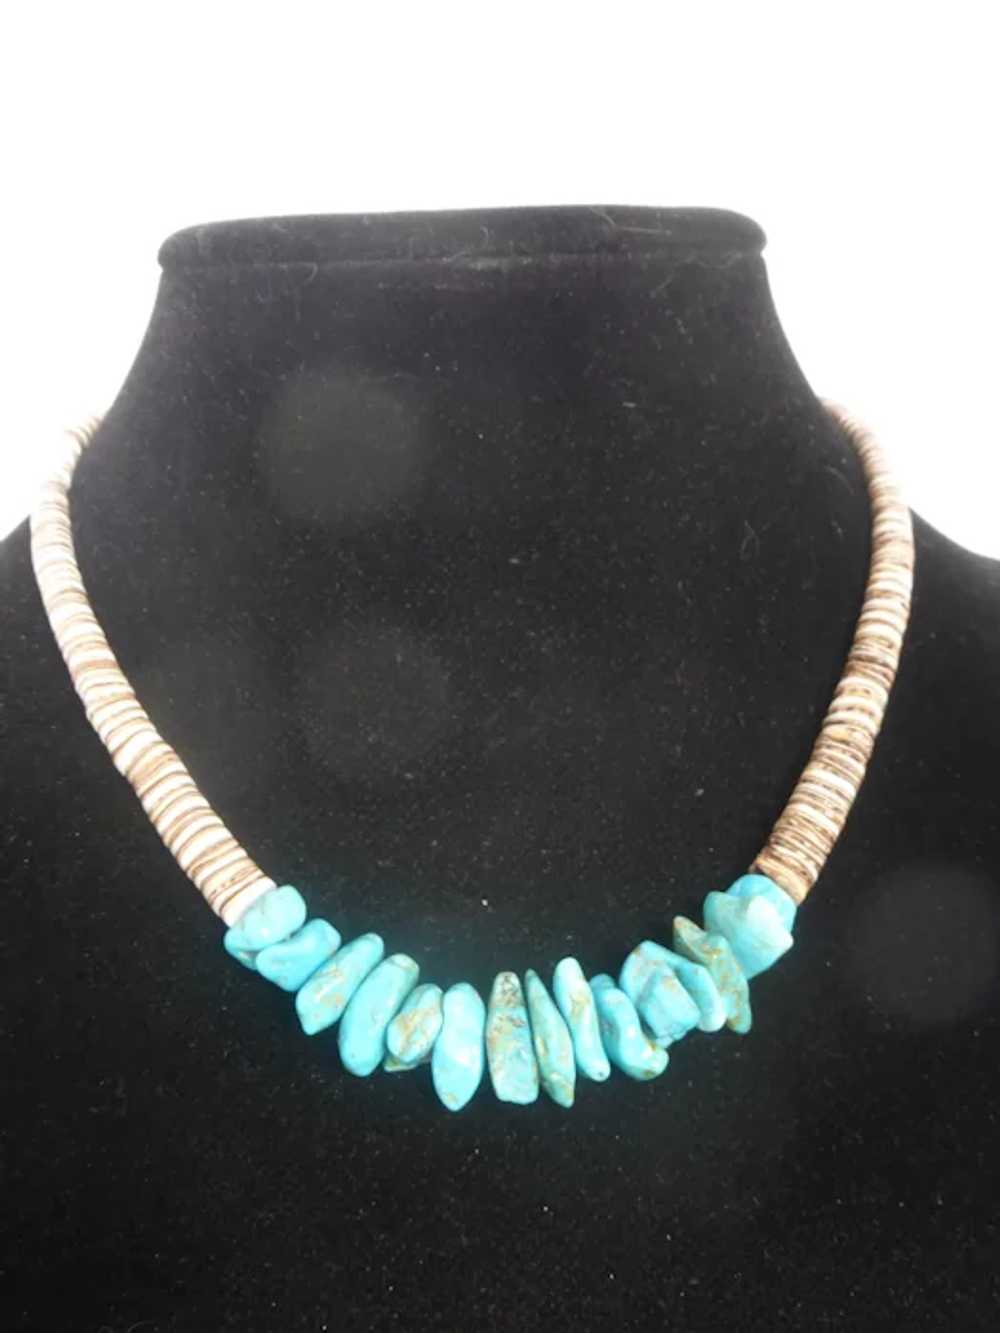 Navajo Turquoise Nugget Heishi Bead Necklace - image 6